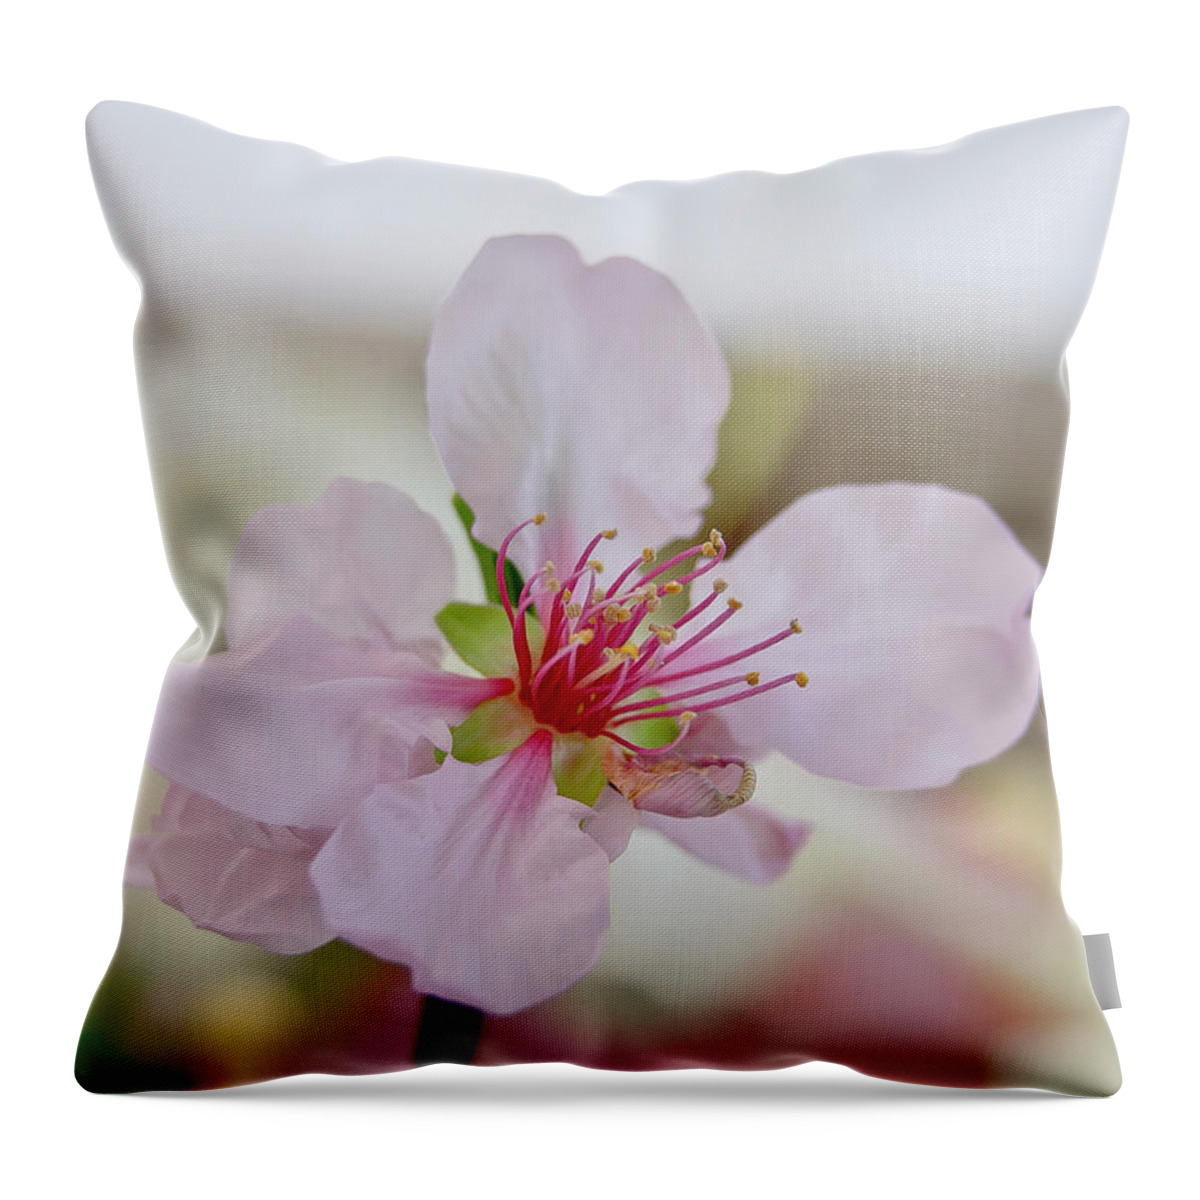 Cherry Throw Pillow featuring the photograph Cherry Blossom I by Elena Perelman